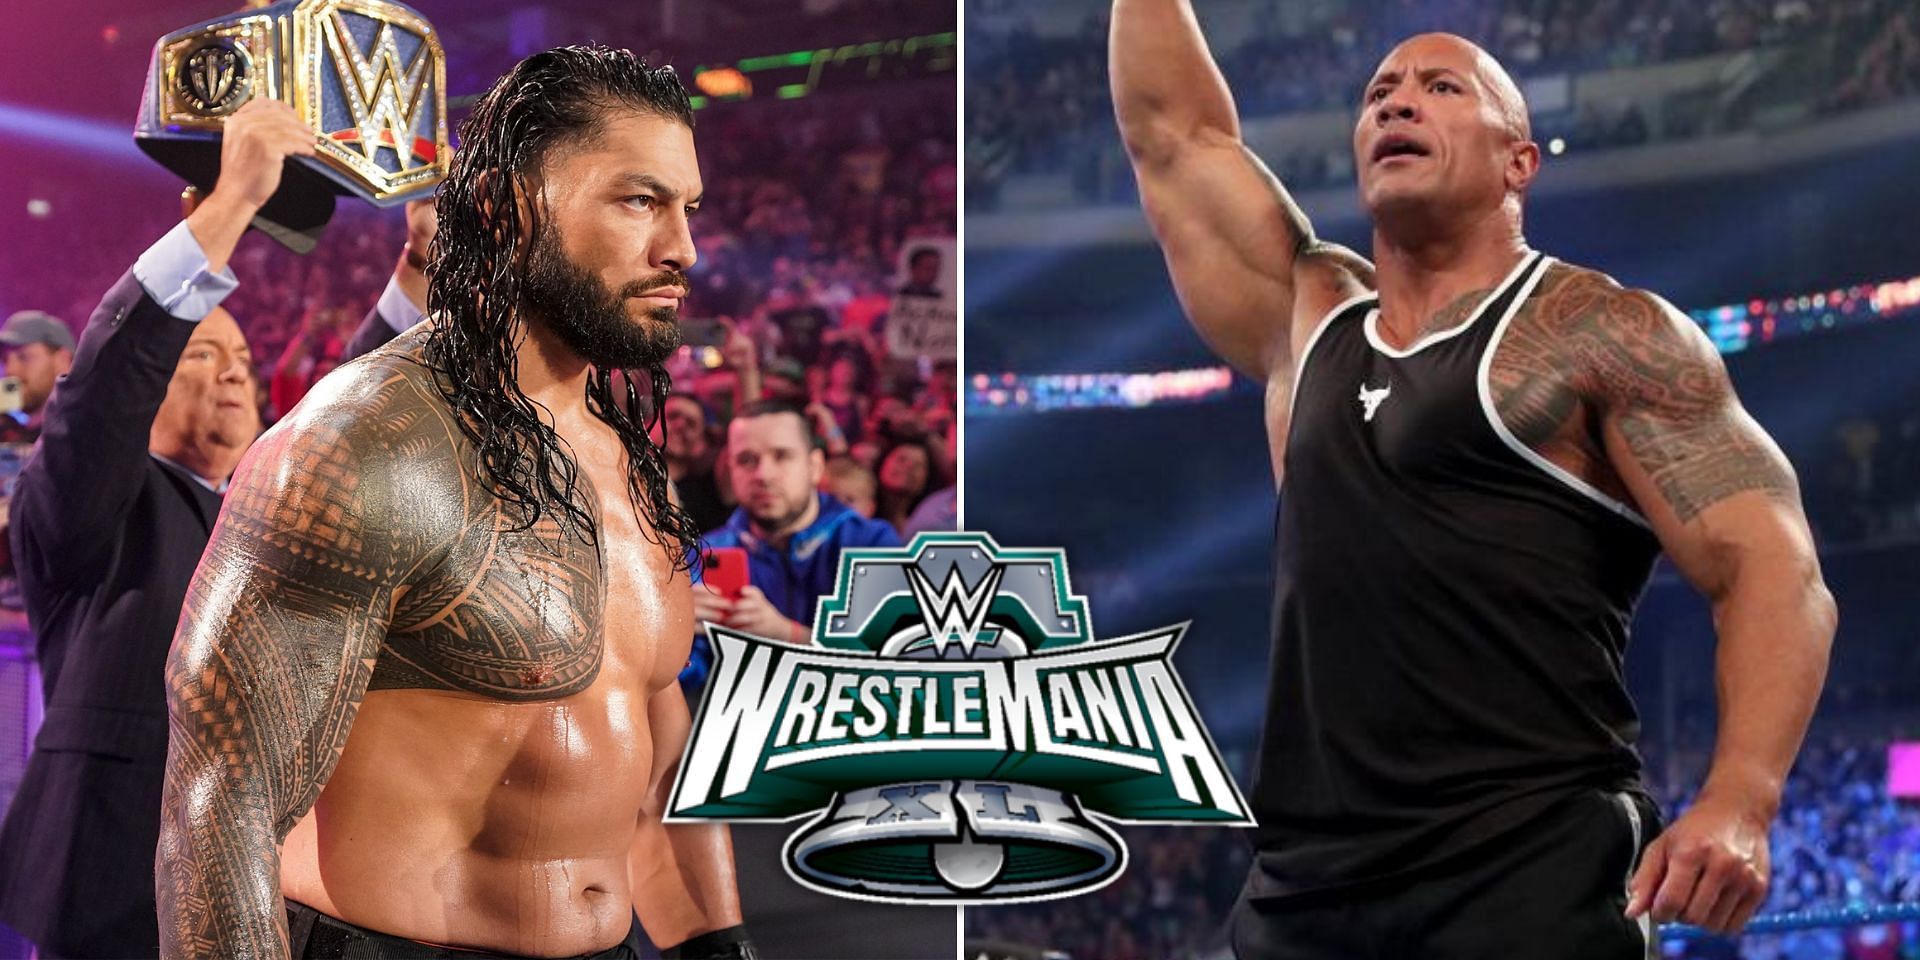 Could we see a showdown between The Rock and Roman Reigns?